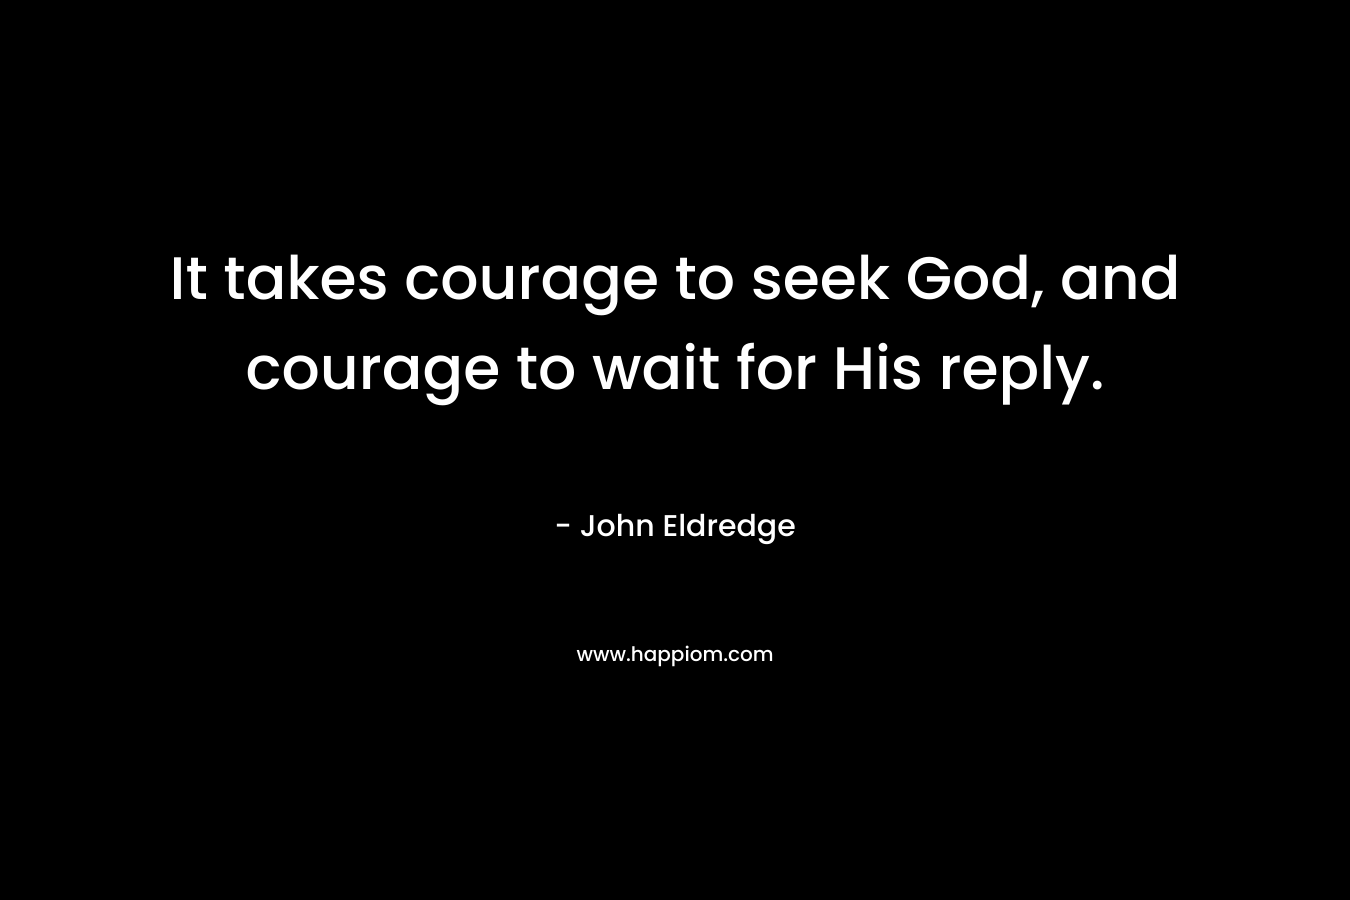 It takes courage to seek God, and courage to wait for His reply.